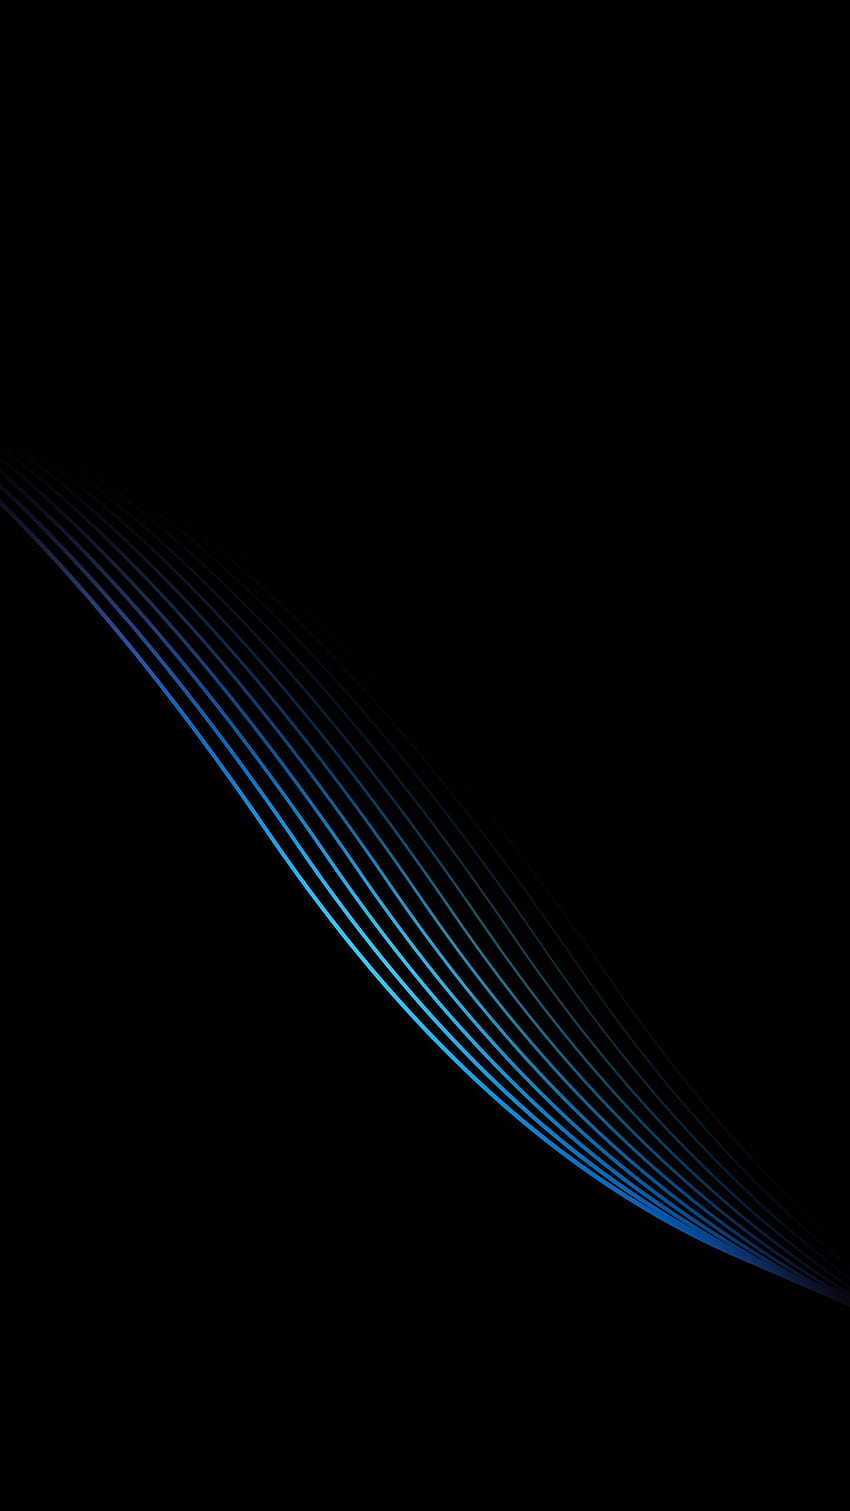 AMOLED Perfect Display BLACK Backgrounds, special amoled curved HD phone wallpaper